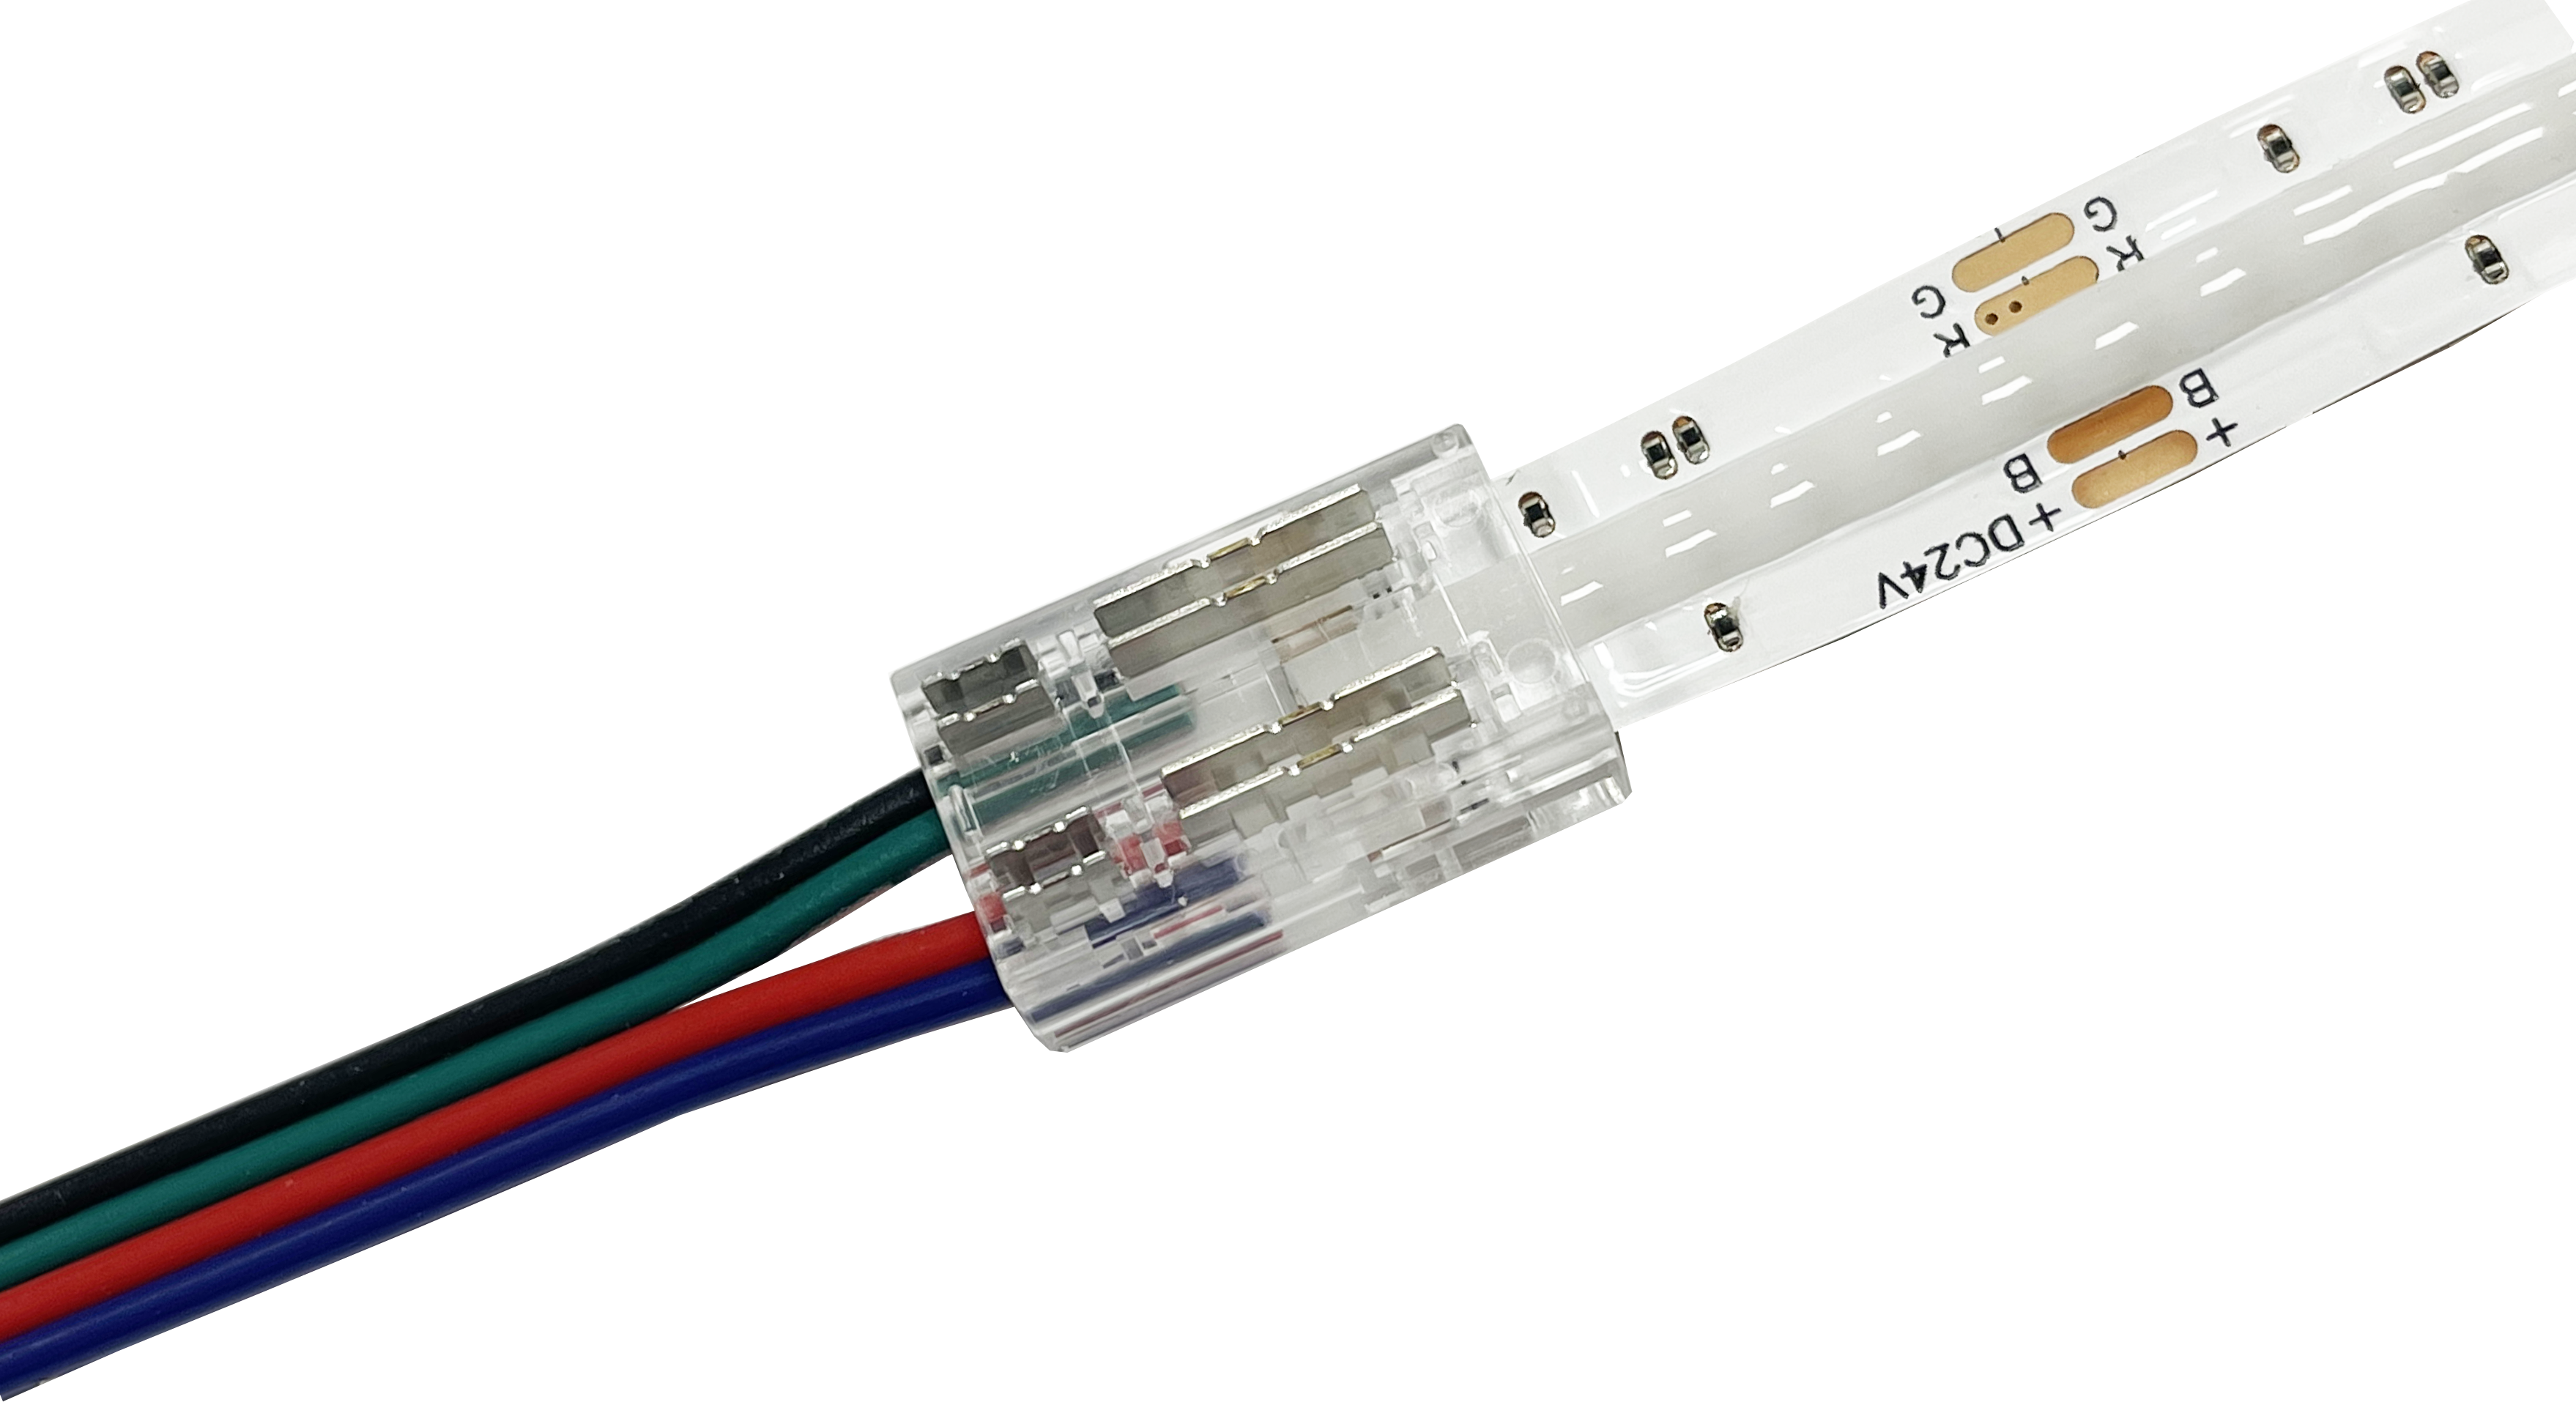 FluxTech - 3 / 4 -Pin CCT / RGB COB LED Strip to Wire Connector for 10mm COB Strip. Pack x 2 Pcs